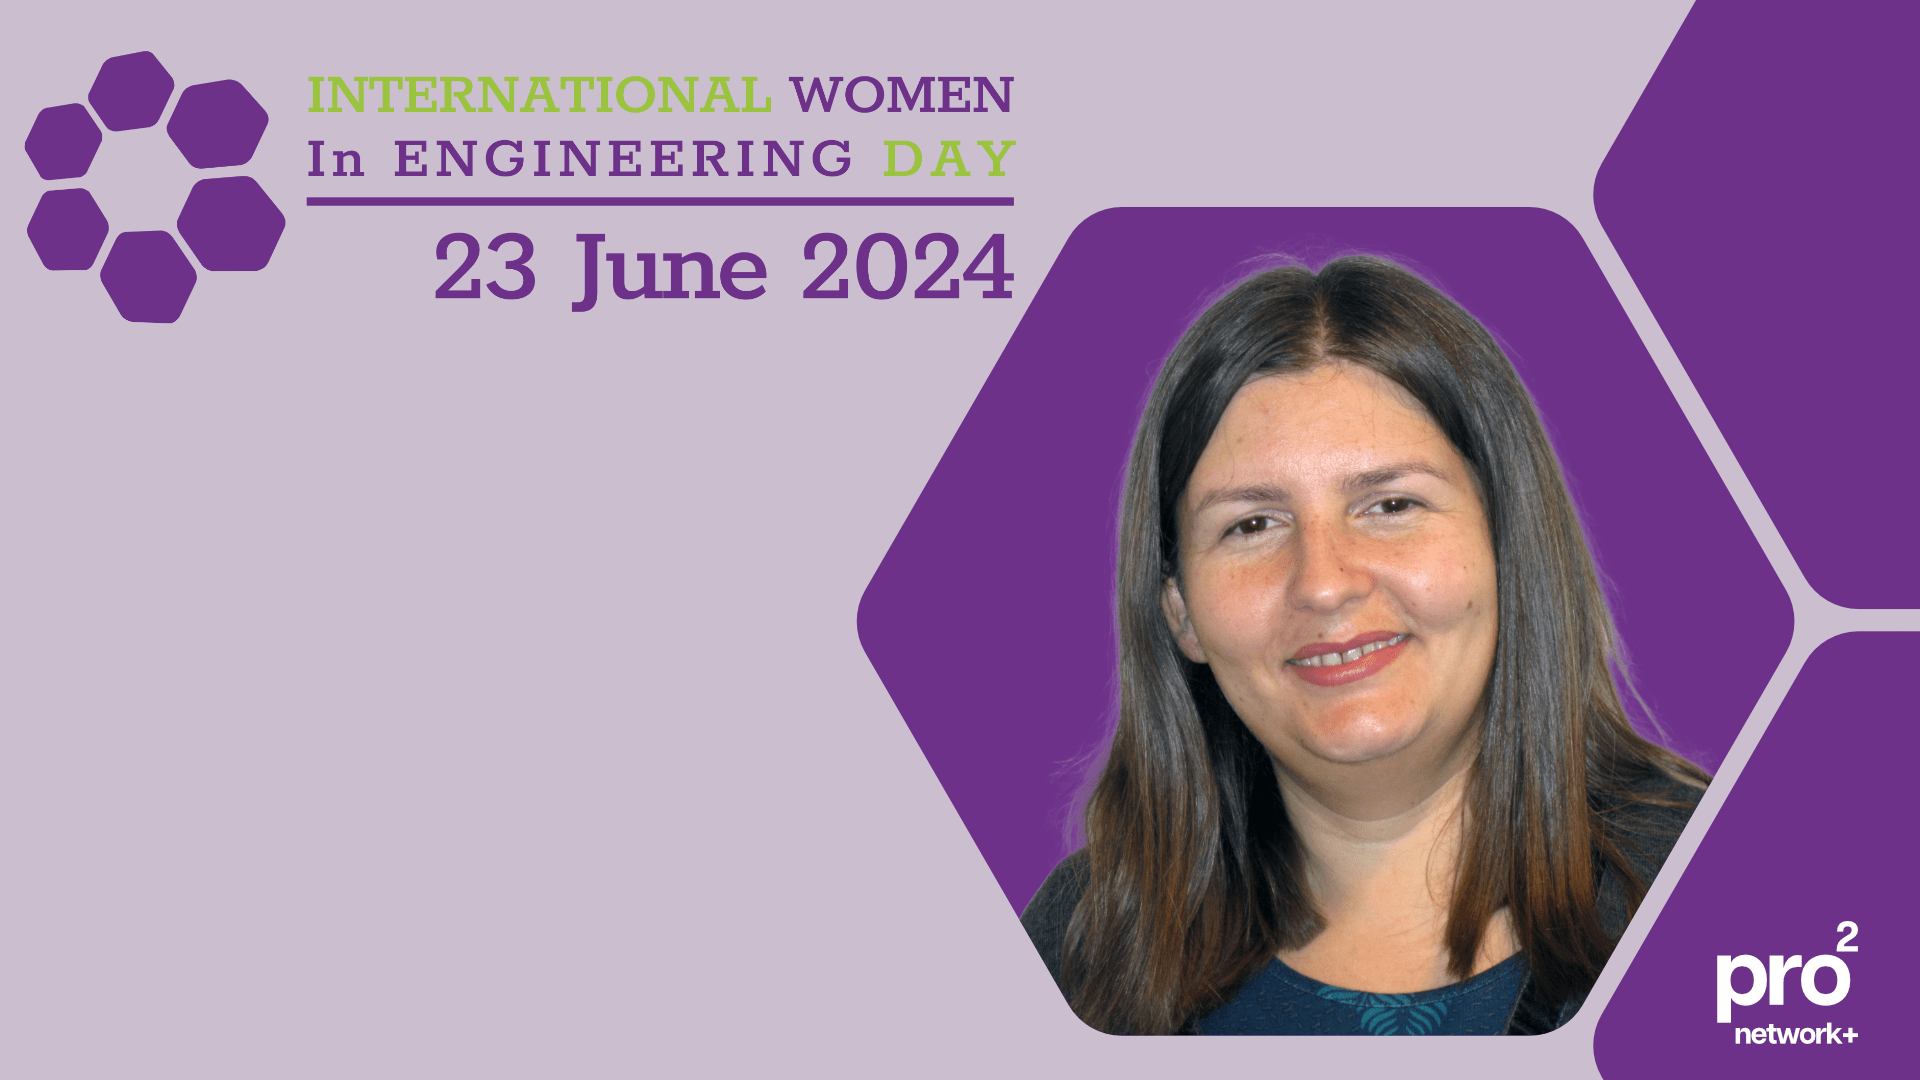 Text reads 'International Women in Engineering Day, 23 June 2024' against a lavender background with a photo of Professor Boriana Koleva and the pro2 network+ logo to the right.